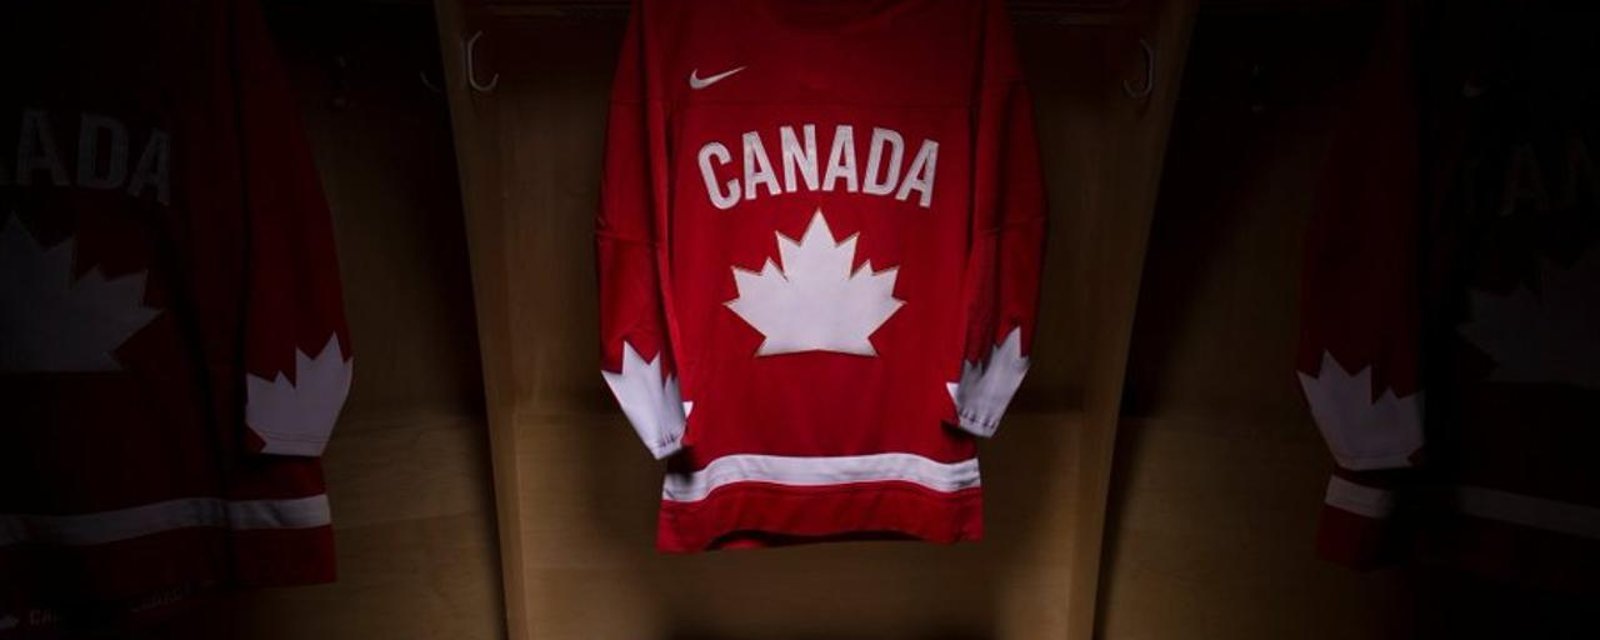 Latest update on players that will face suspension for involvement in Team Canada’s 2018 sexual assault scandal